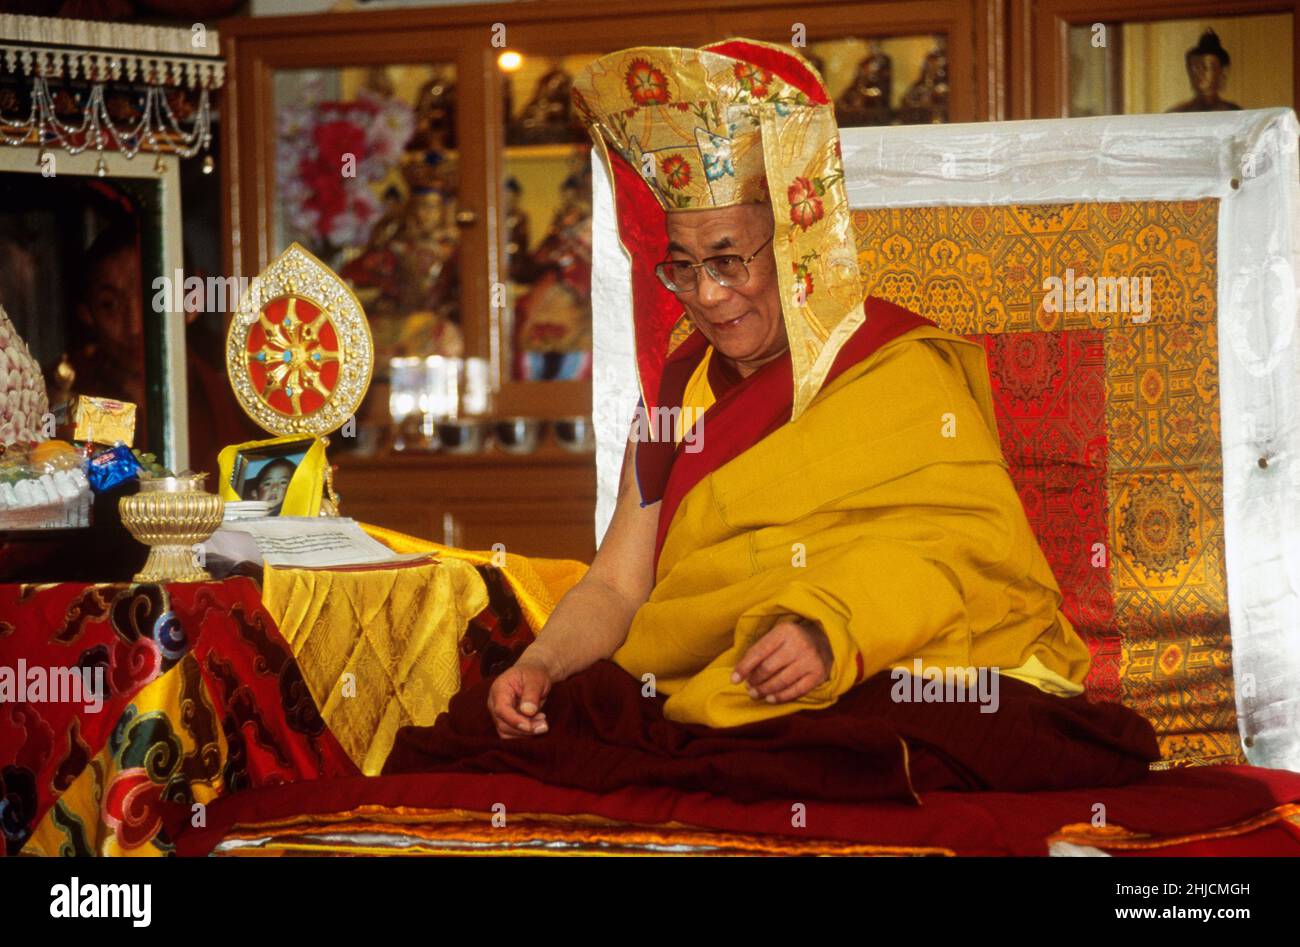 The Dalai Lama, the political and spiritual leader of the Tibetan people, performing the Long Life ceremony; Dharamsala, India. Stock Photo